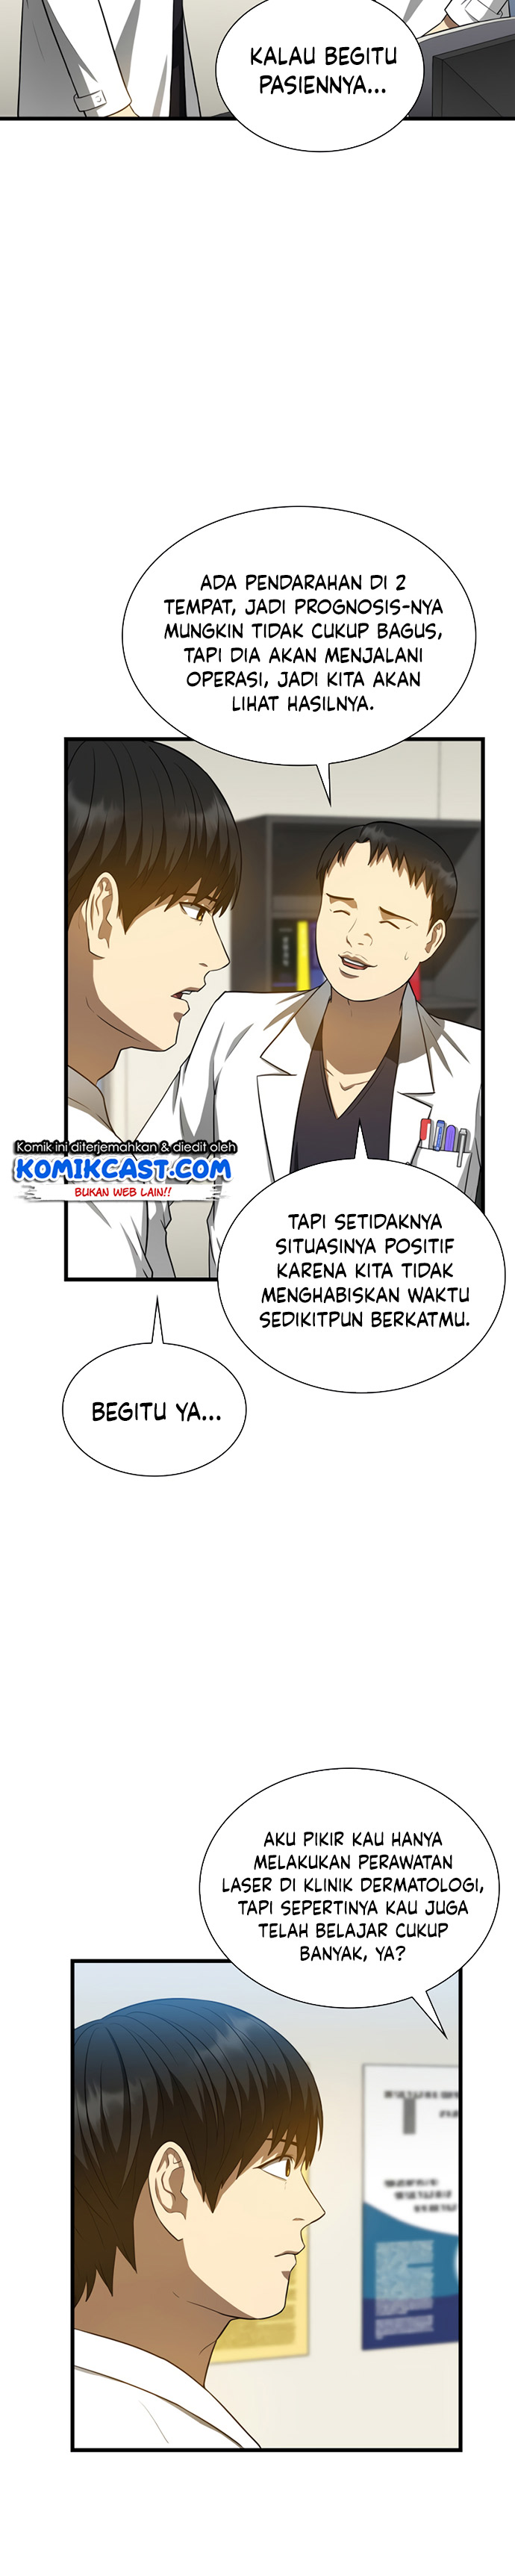 Perfect Surgeon Chapter 16 25